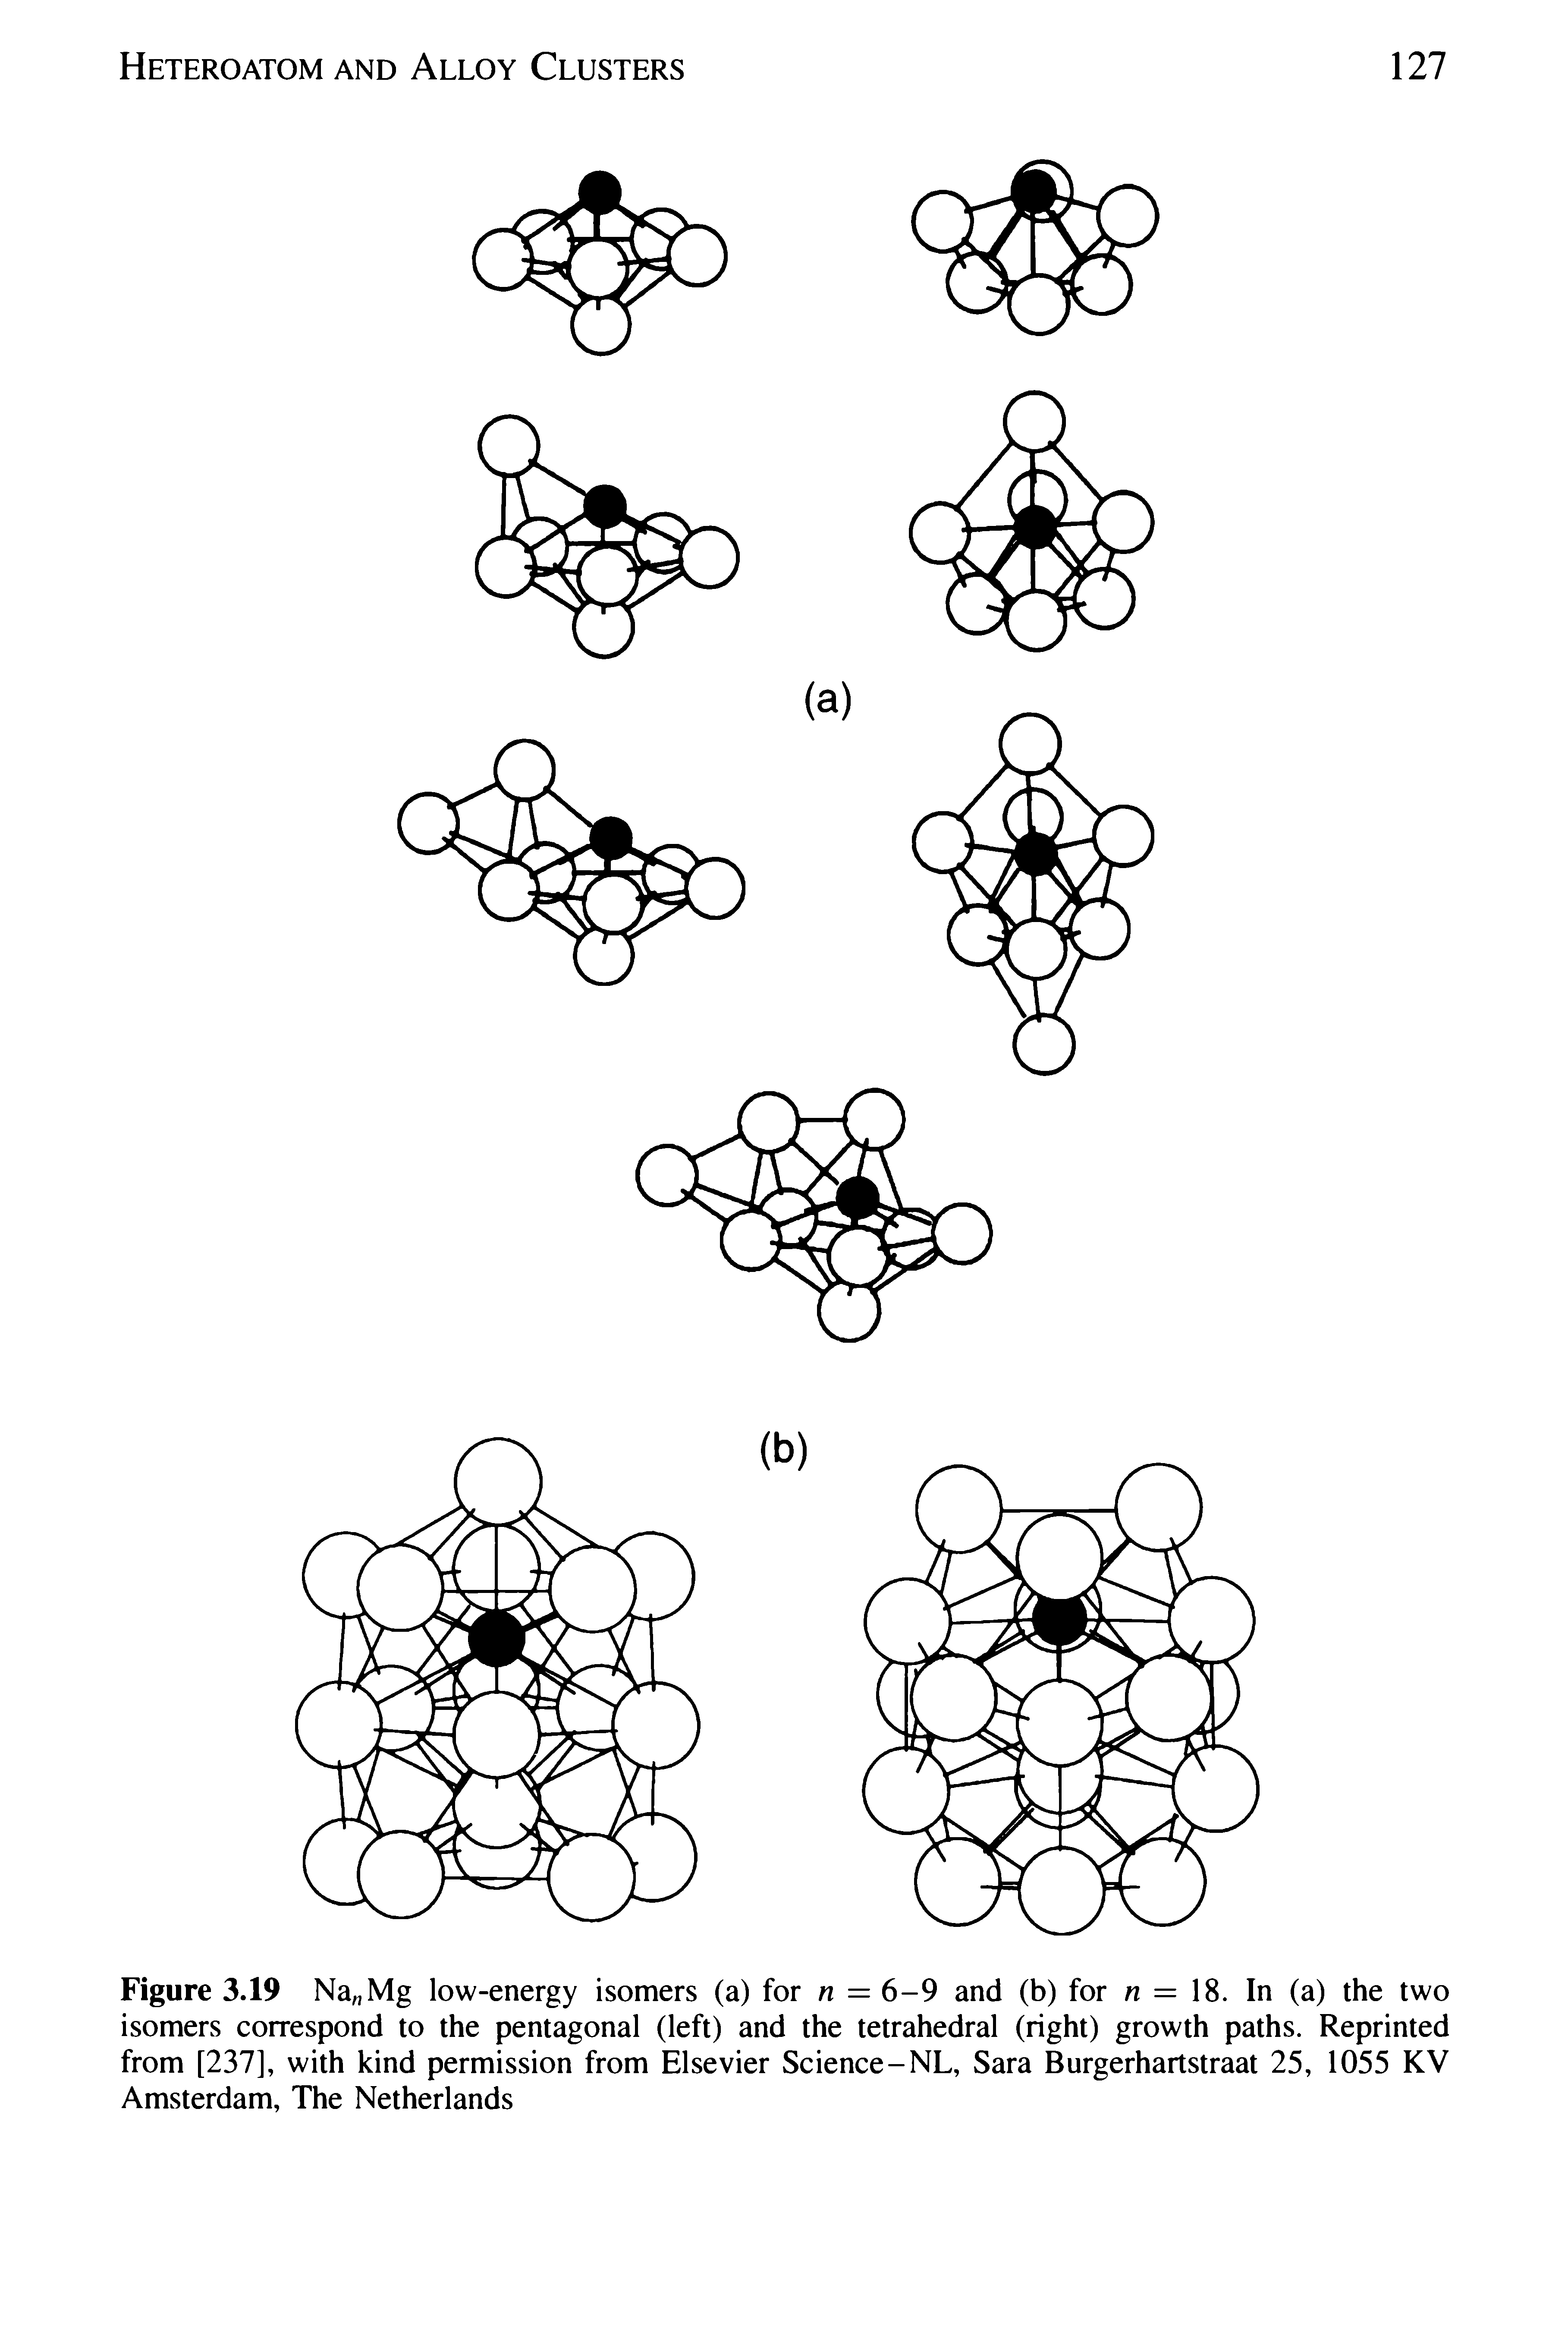 Figure 3.19 Na Mg low-energy isomers (a) for n = 6-9 and (b) for n = S. In (a) the two isomers correspond to the pentagonal (left) and the tetrahedral (right) growth paths. Reprinted from [237], with kind permission from Elsevier Science-NL, Sara Burgerhartstraat 25, 1055 KV Amsterdam, The Netherlands...